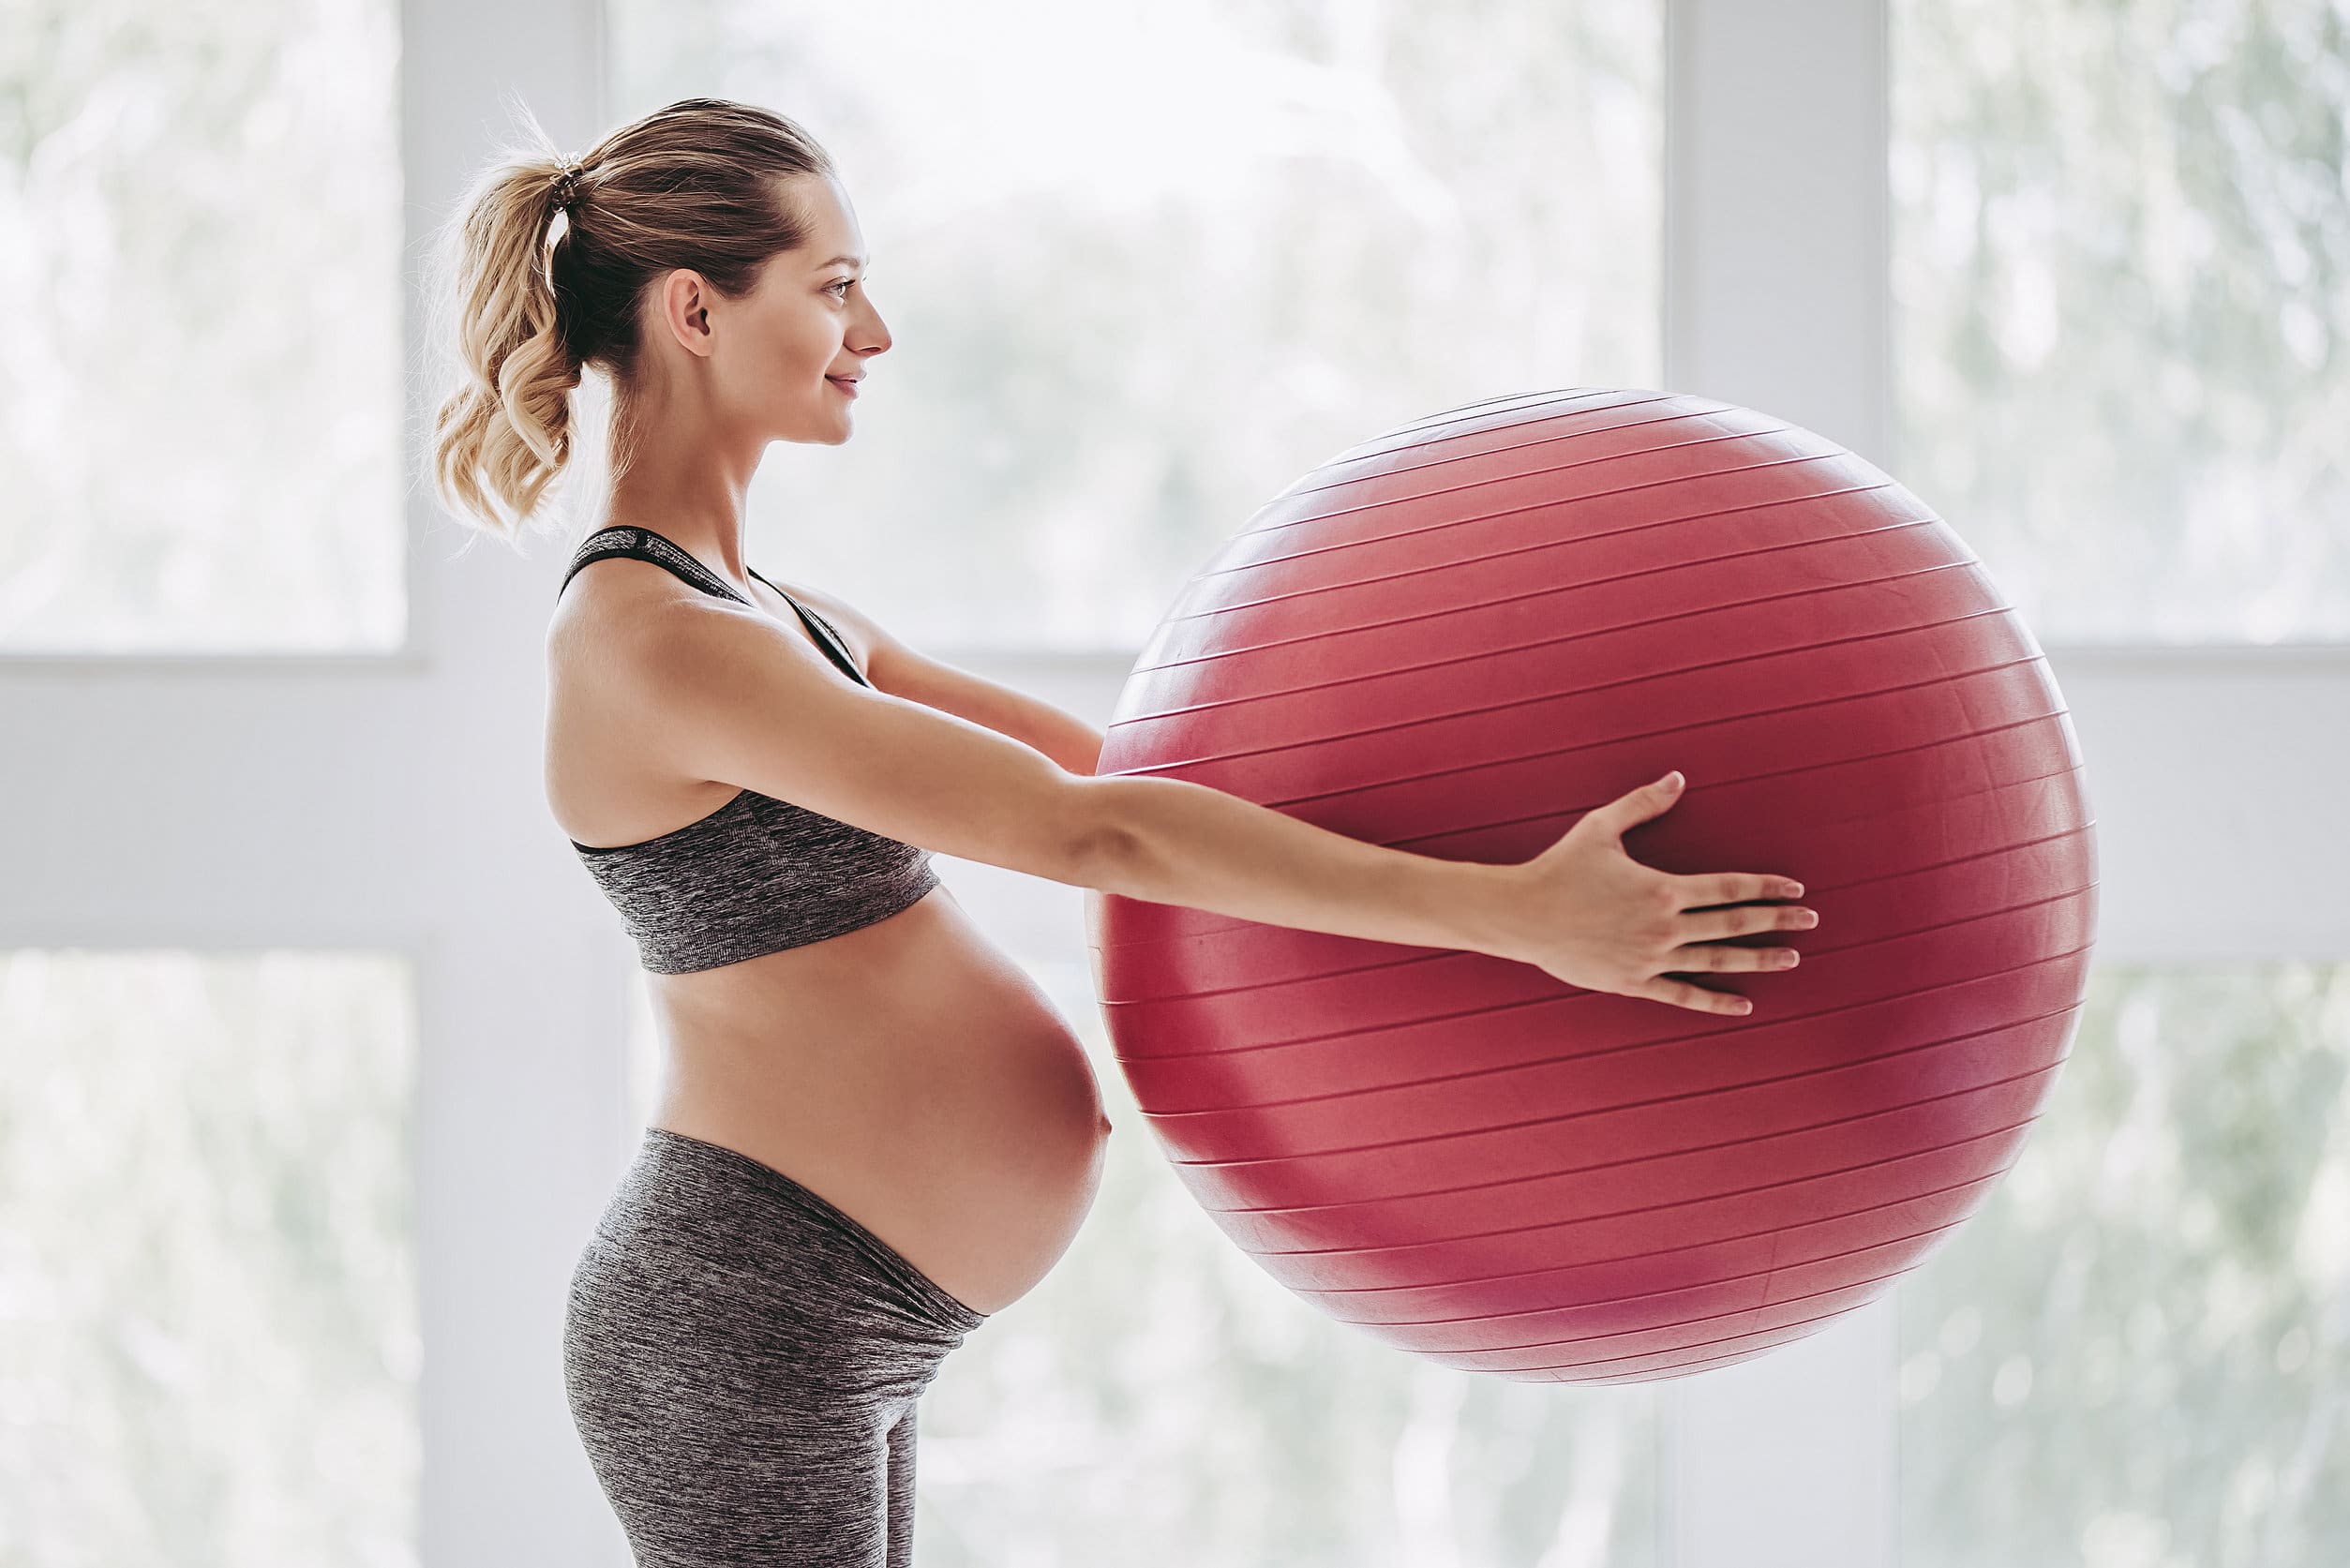 Can Your Exercise While Pregnant?